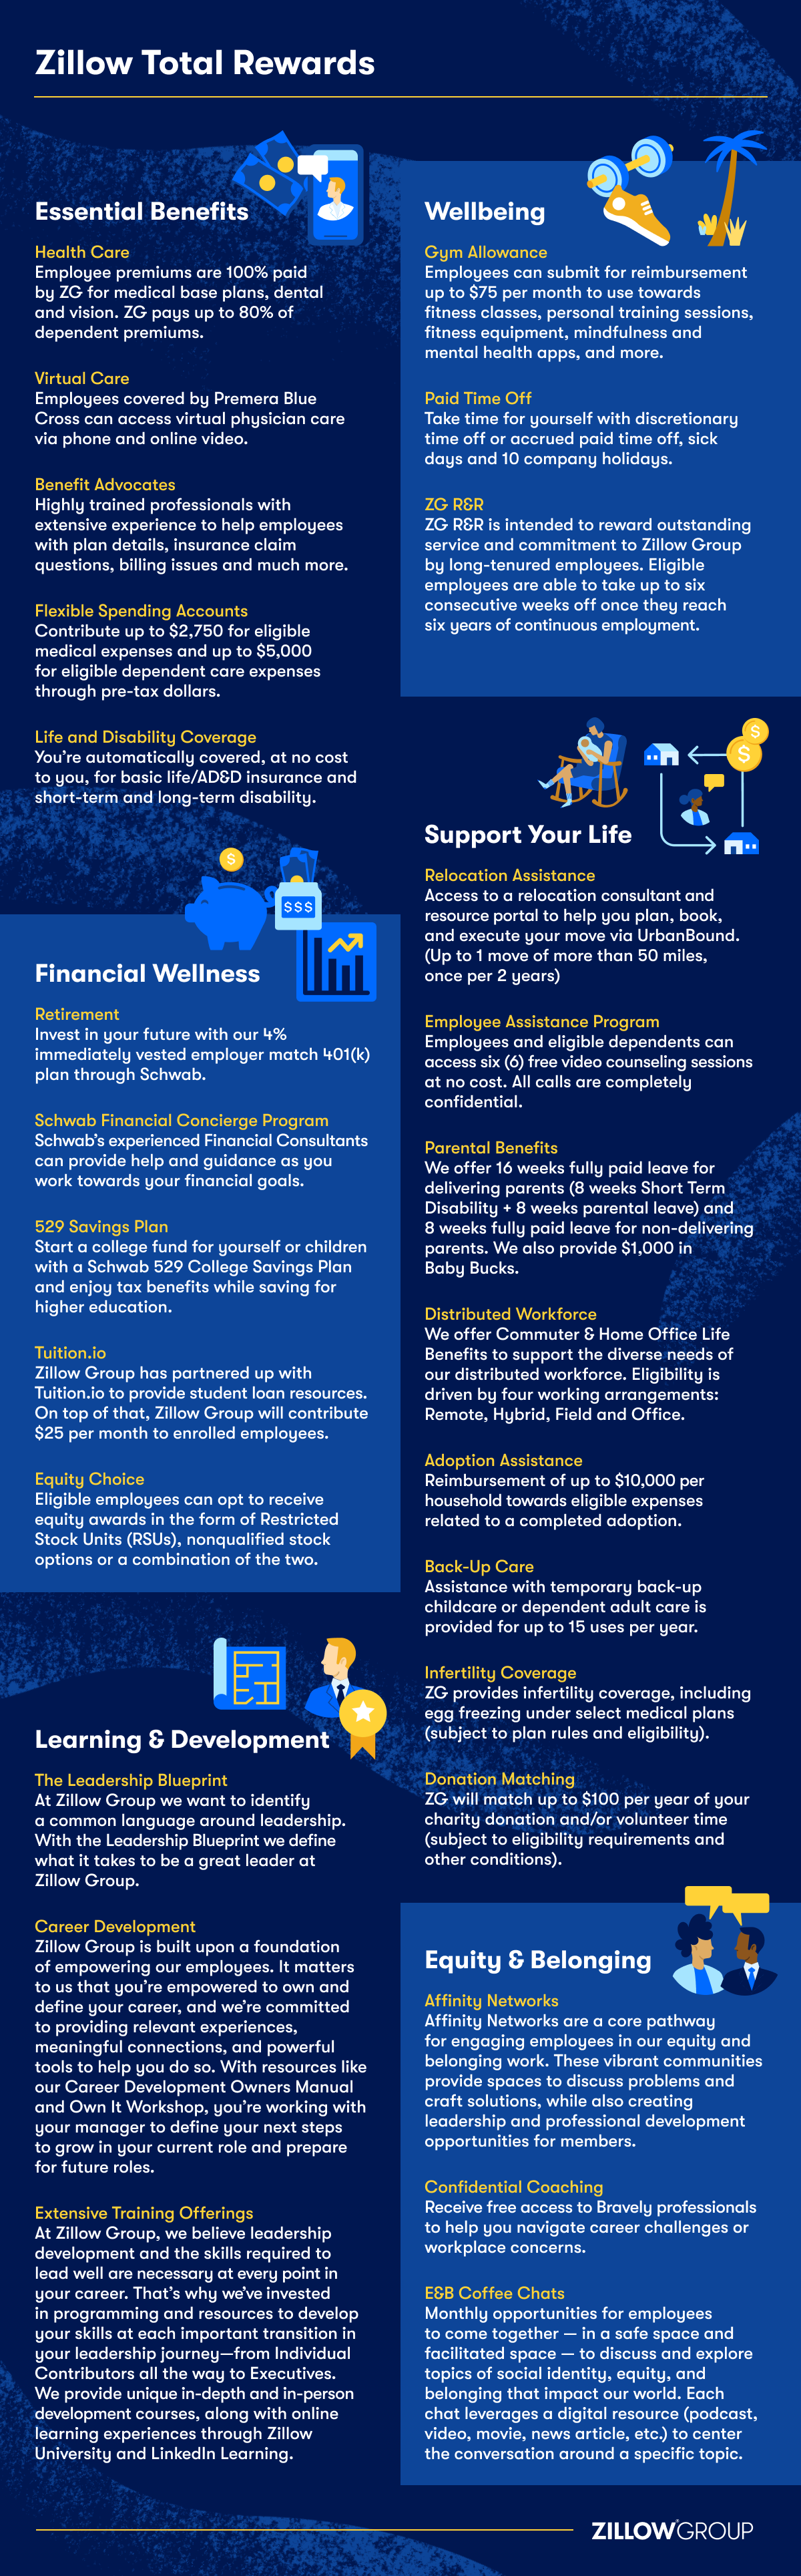 infographic that explains the details of employee benefits at Zillow